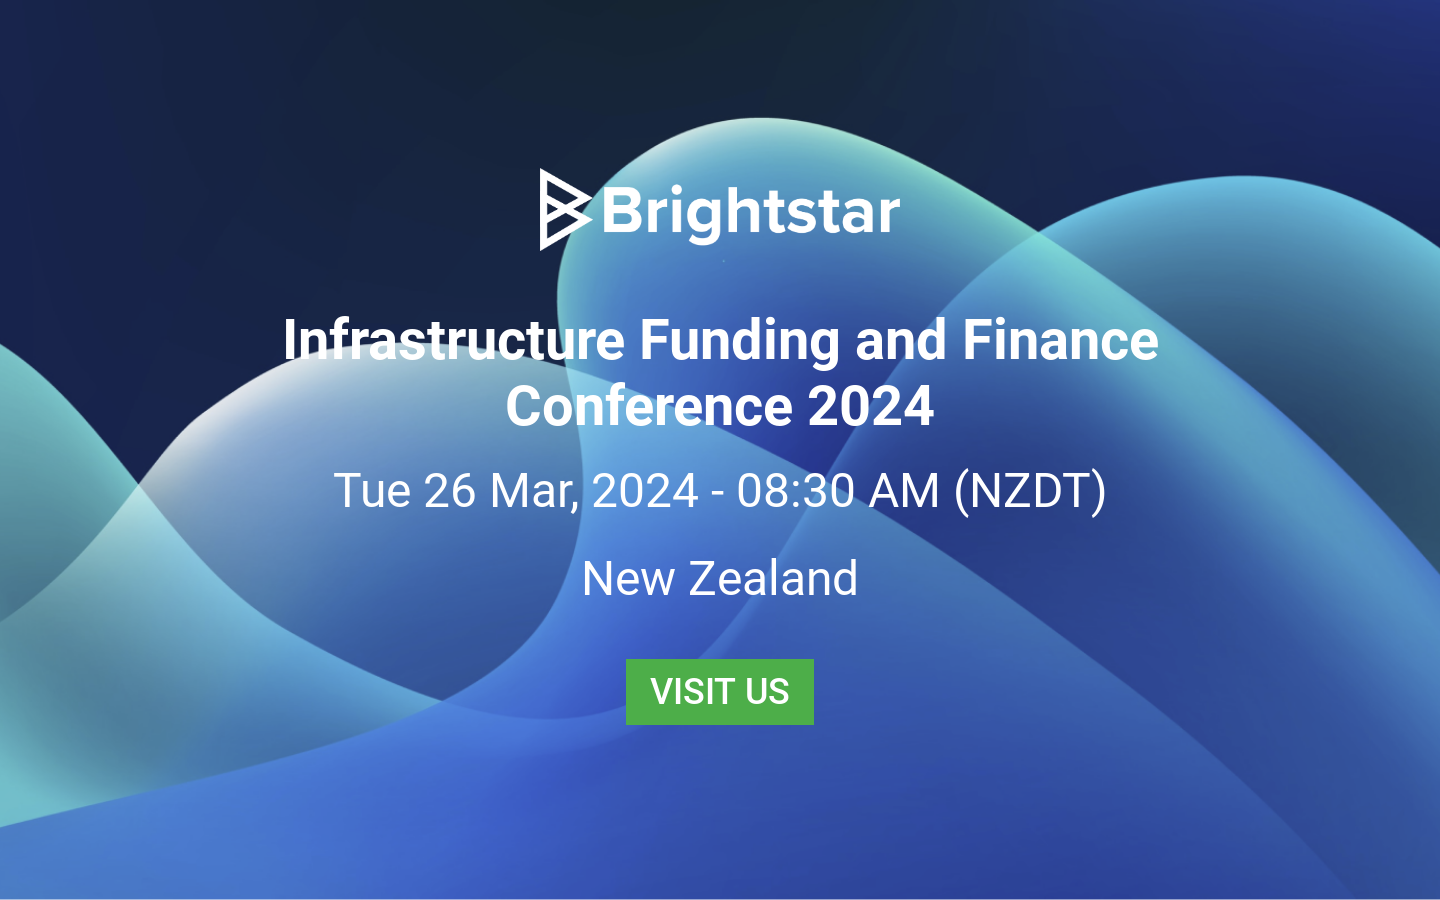 Infrastructure Funding and Finance Conference 2024